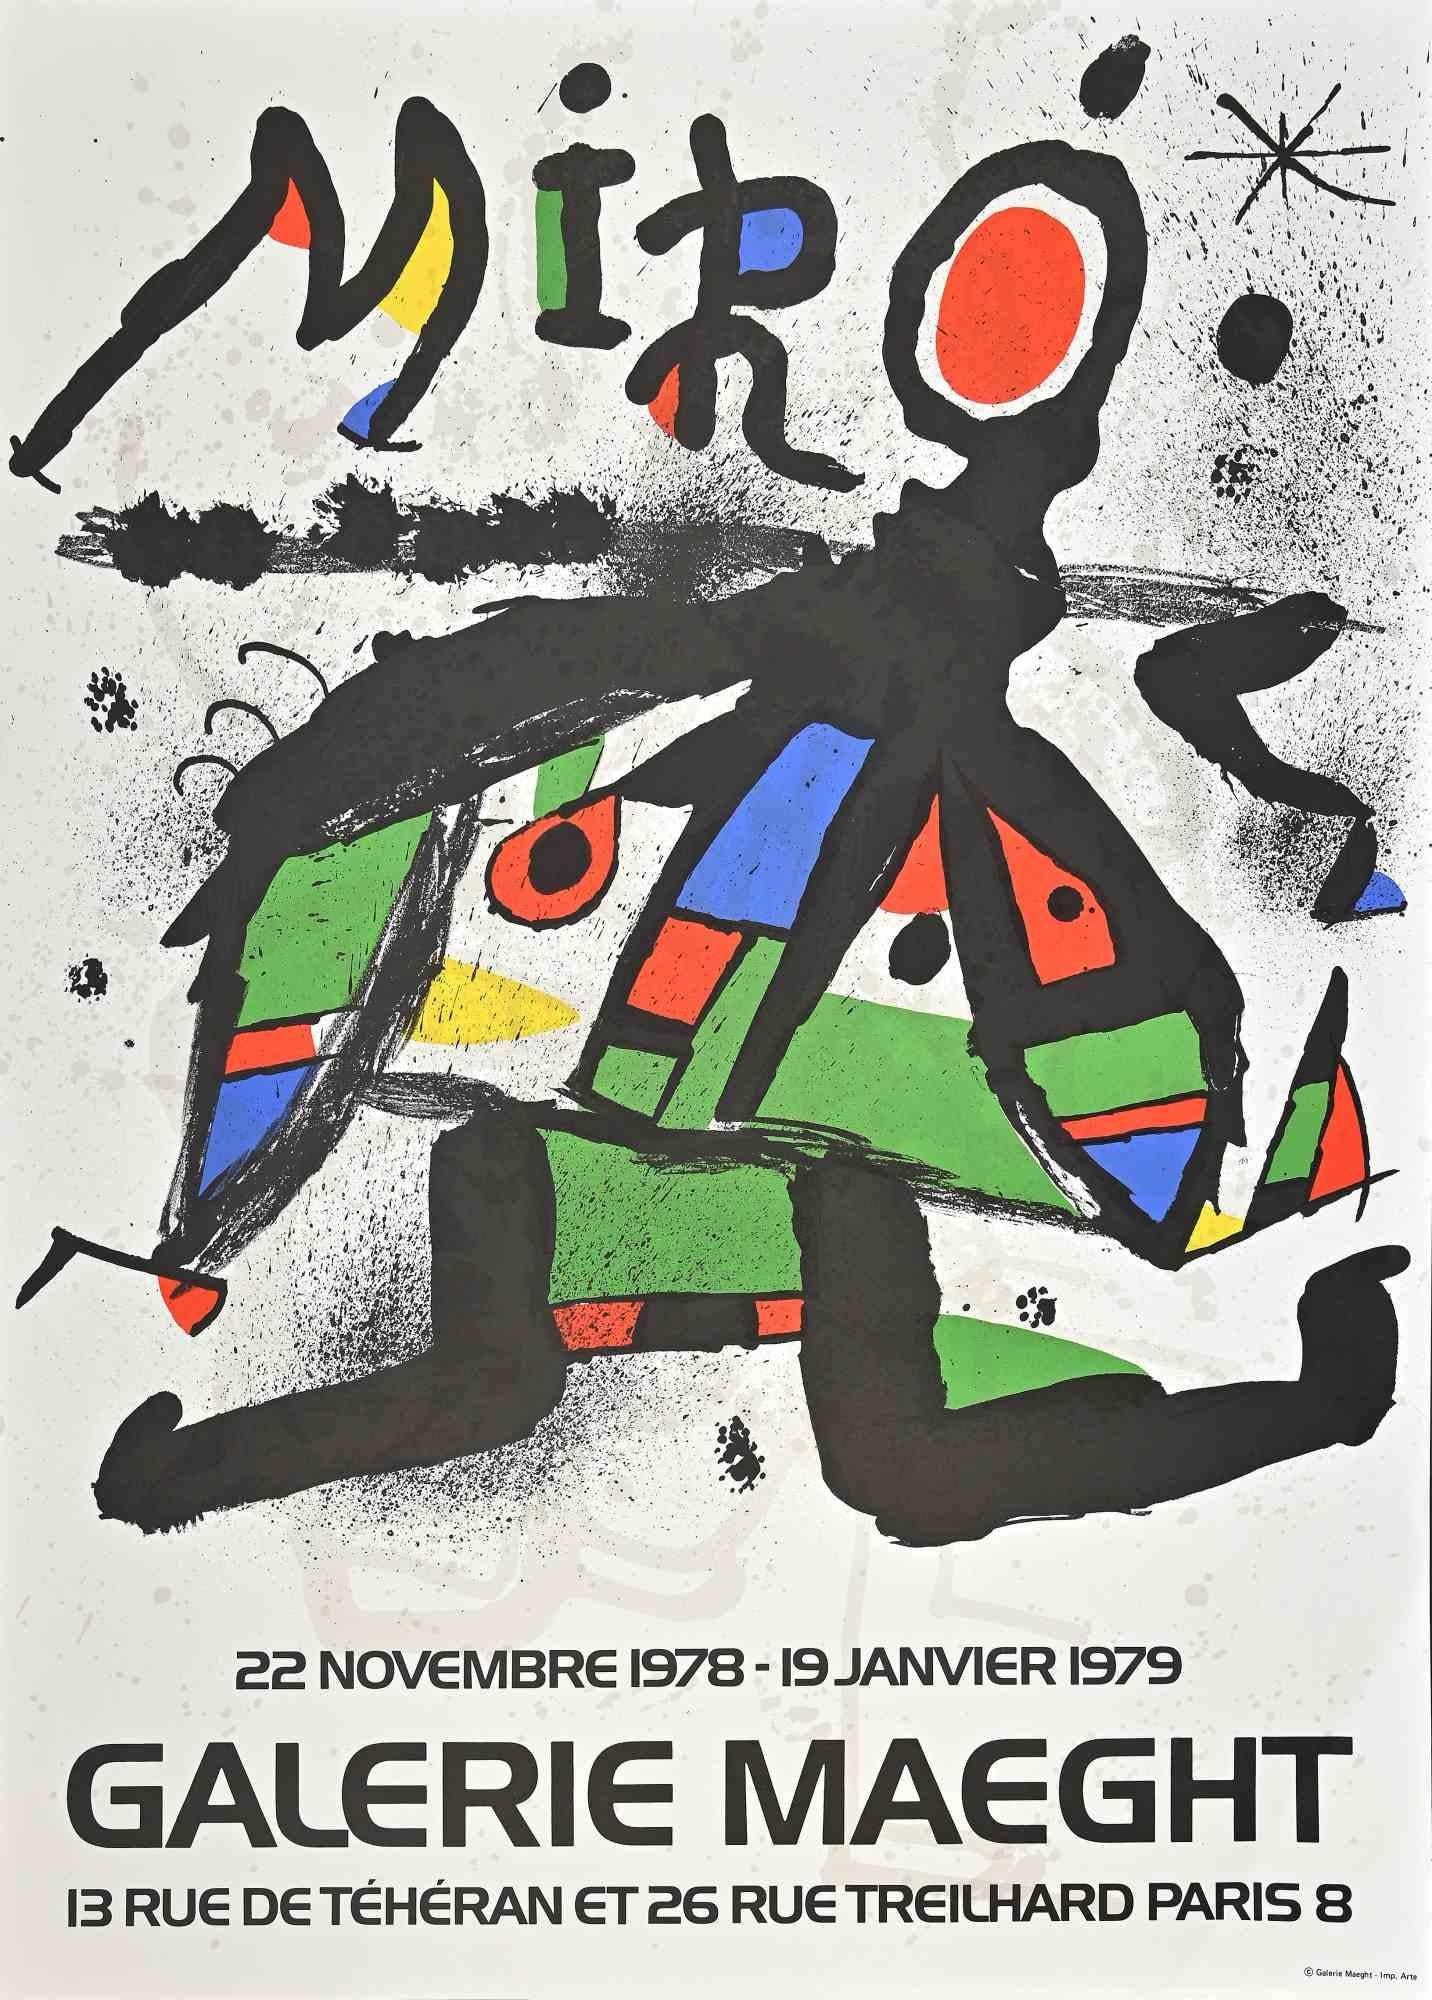 (after) Joan Miró Abstract Print - Vintage Poster Exhibition Galerie Maeght after Joan Mirò - 1978